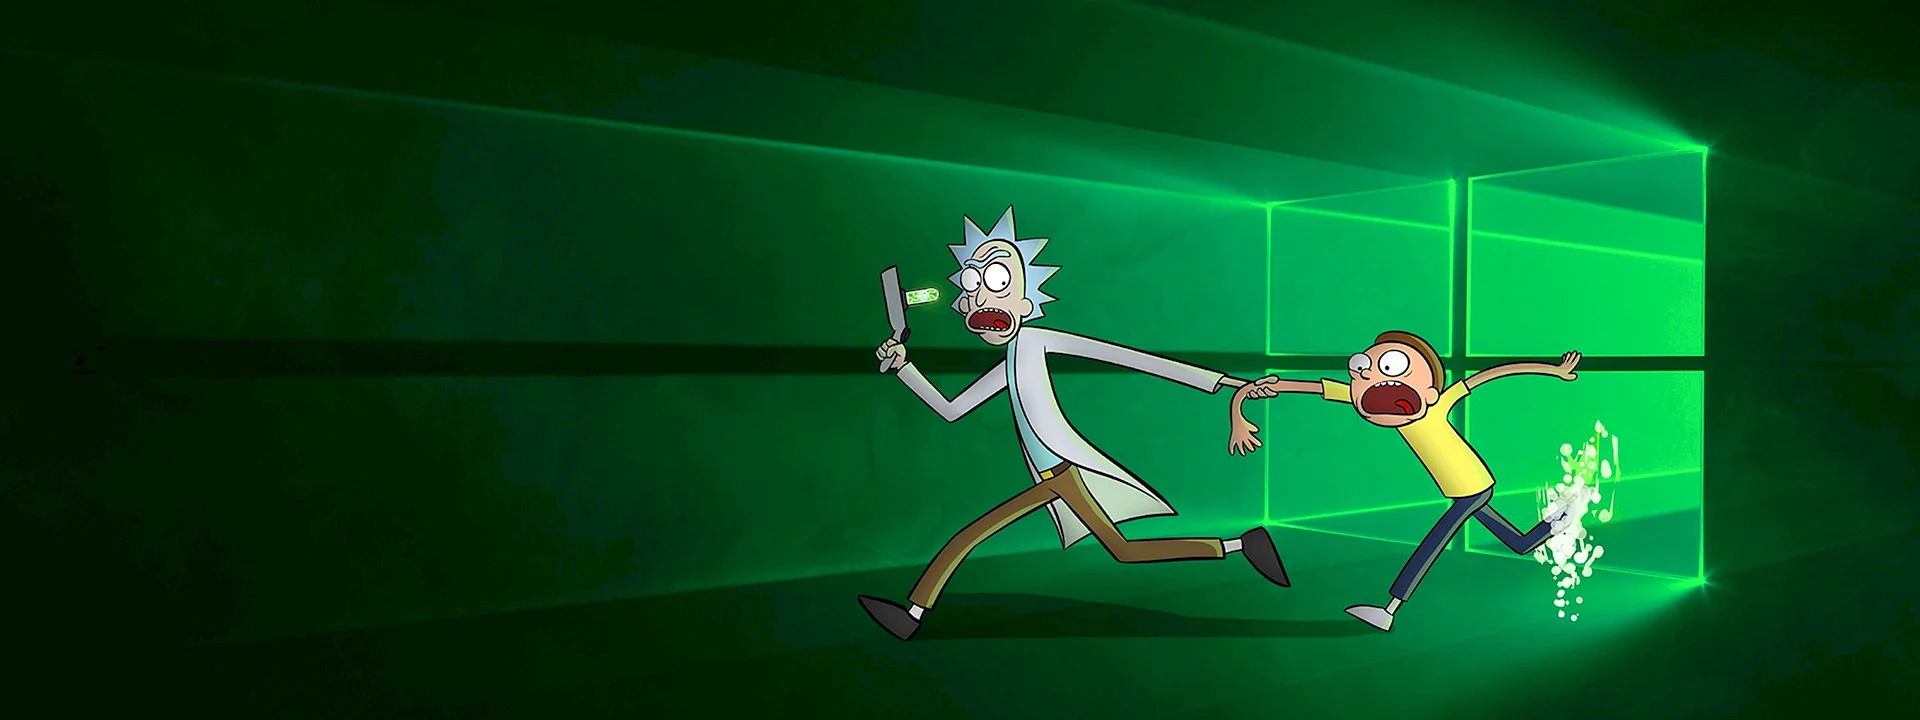 Rick And Morty Engine Wallpaper